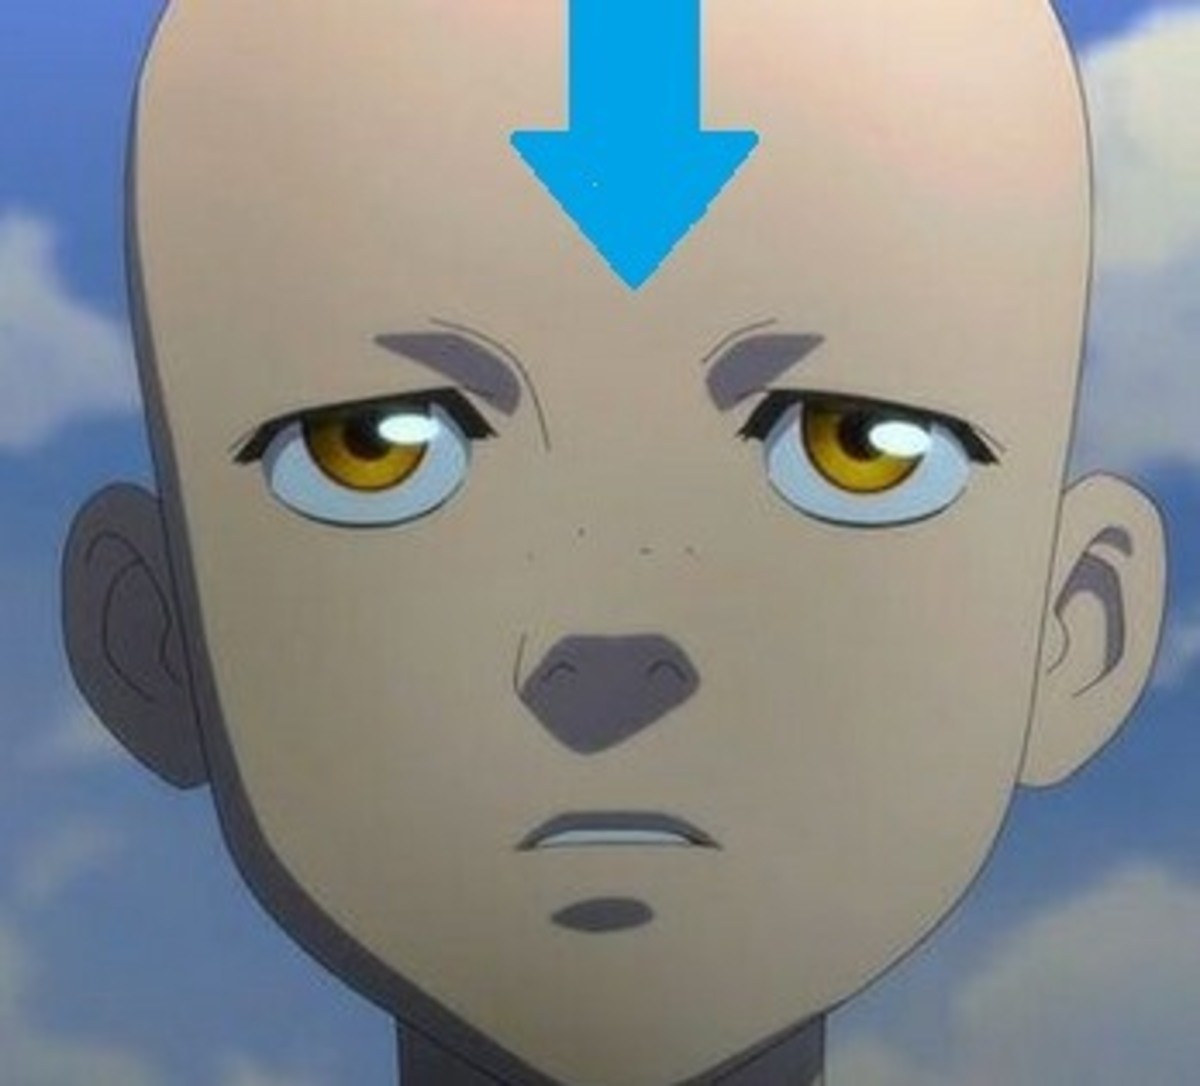 The new Avatar movie is interesting